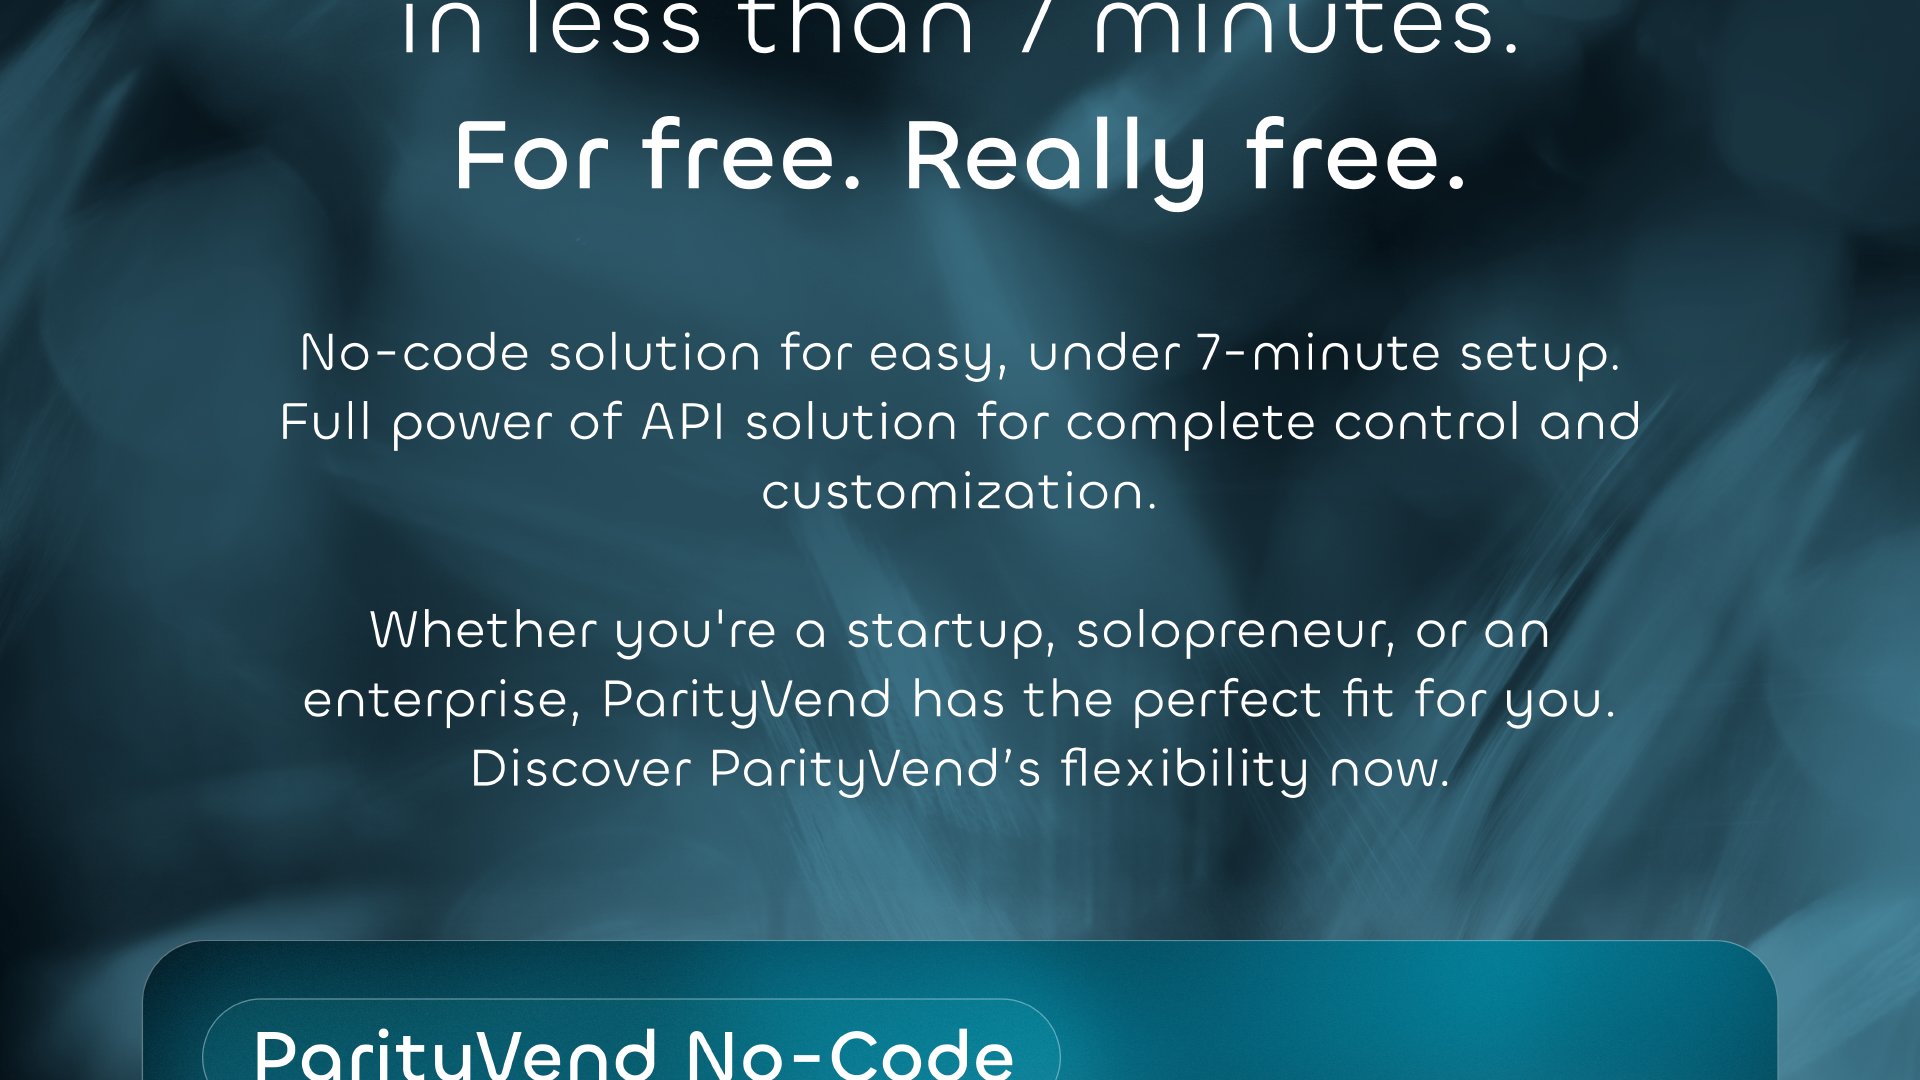 Start maximizing your sales in less than 7 minutes. Free. Really free. No-Code solution for easy, under 7-minute setup. Full power of API solution for complete control and customization. Whether you're a startup, solopreneur, or an enterprise, ParityVend has the perfect fit for you. Discover ParityVend's flexibility now.